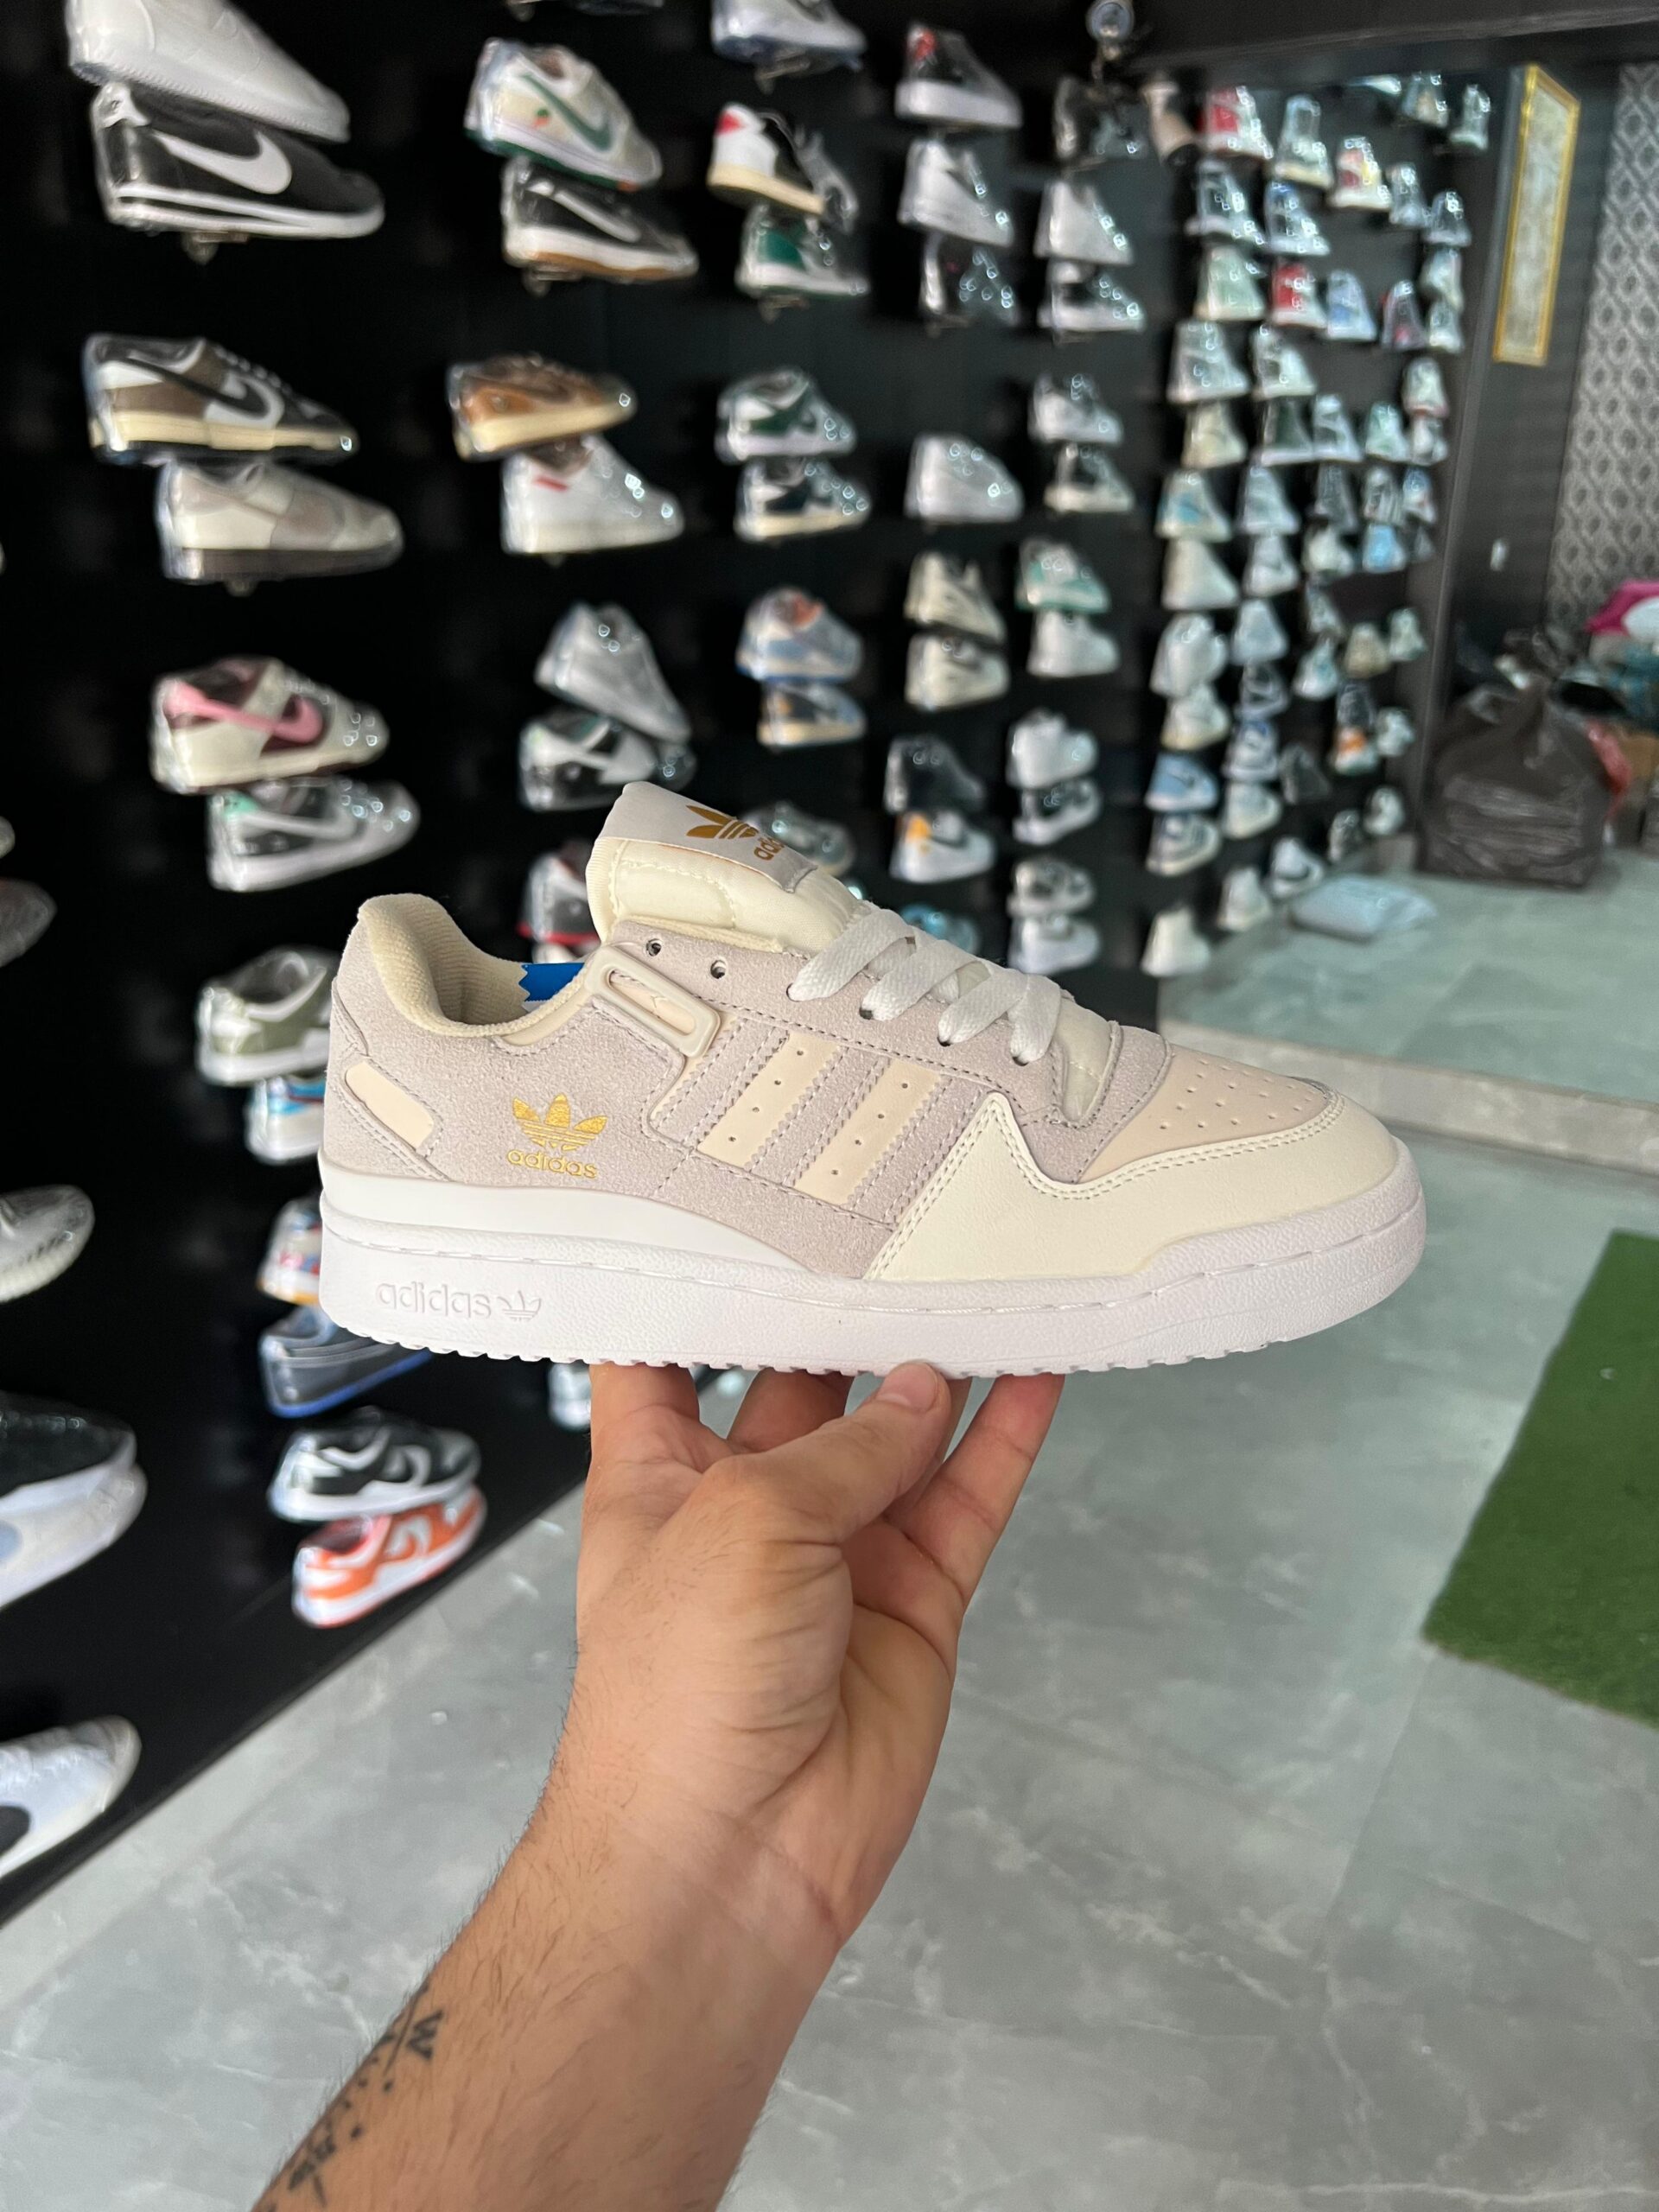 Imported forum sneakers For Girls 5 Colors